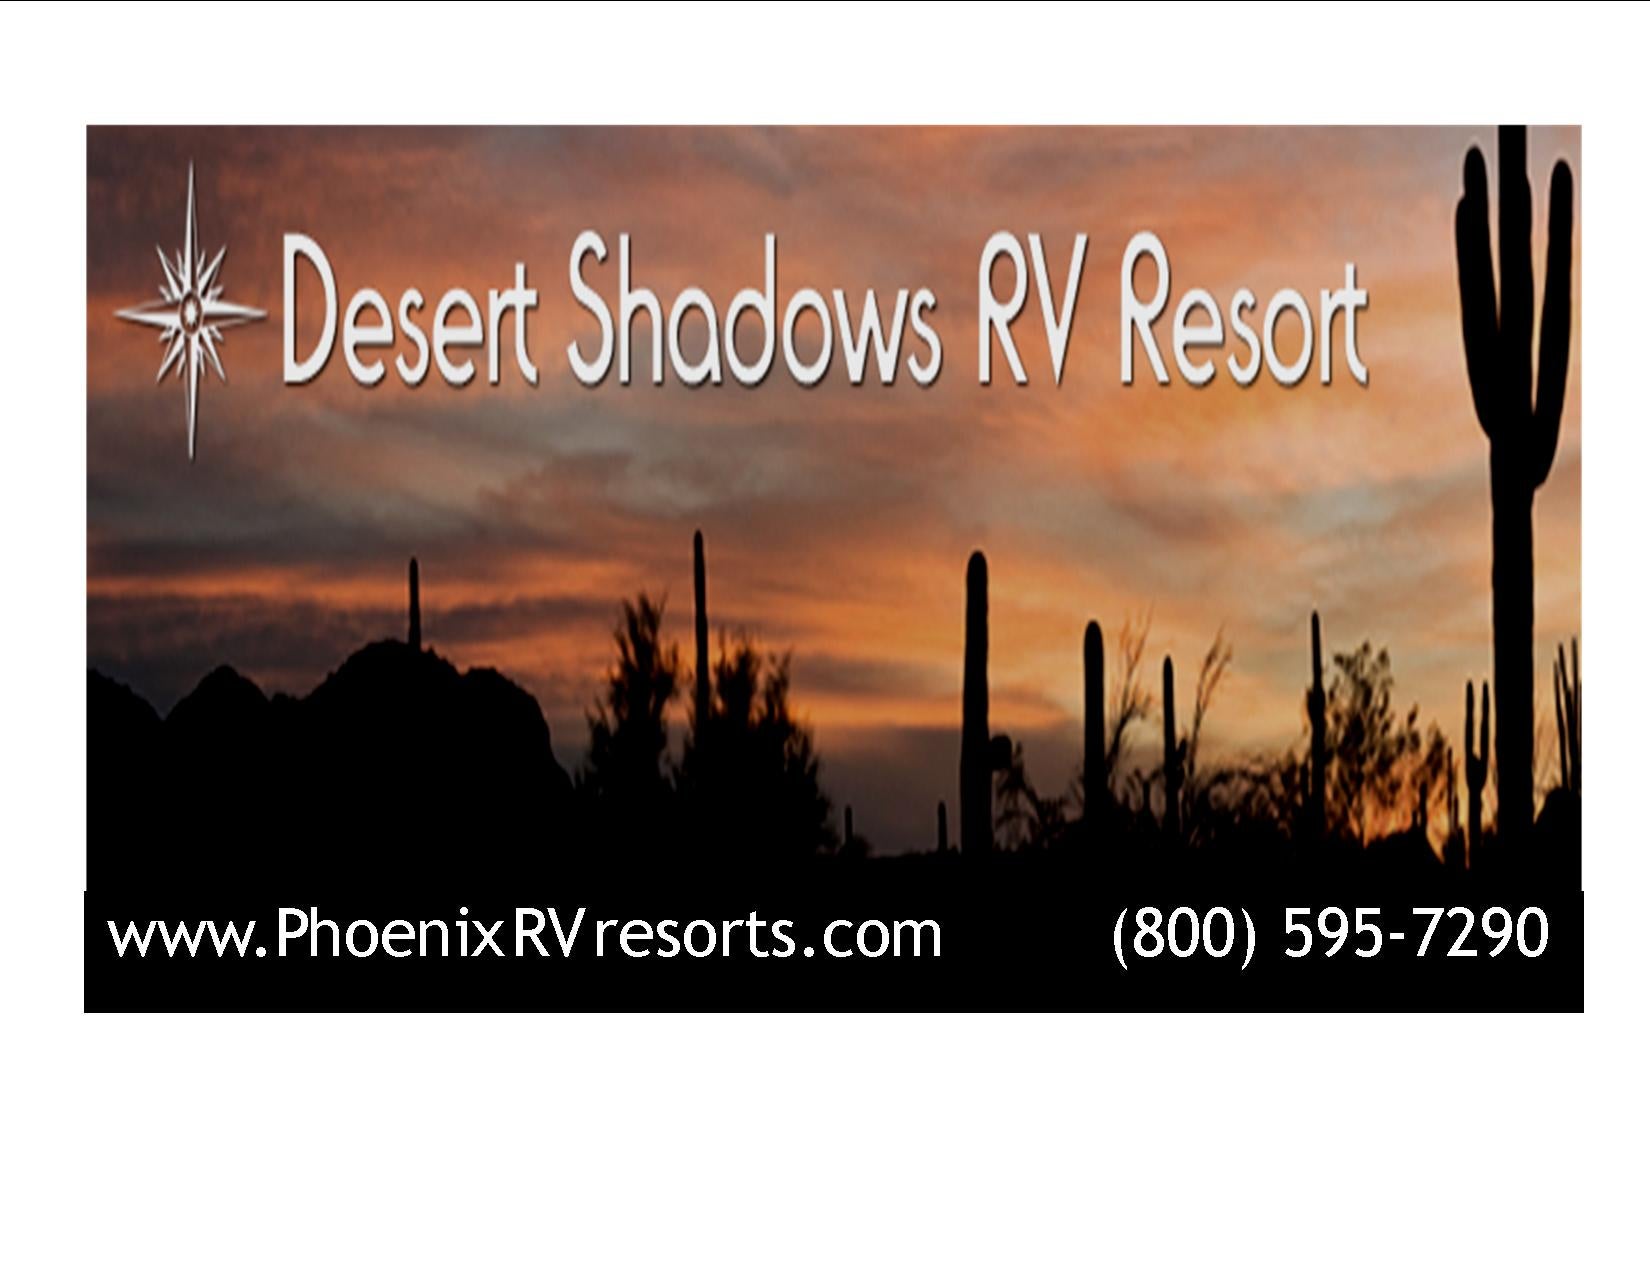 Camper submitted image from Desert Shadows RV Resort - 1